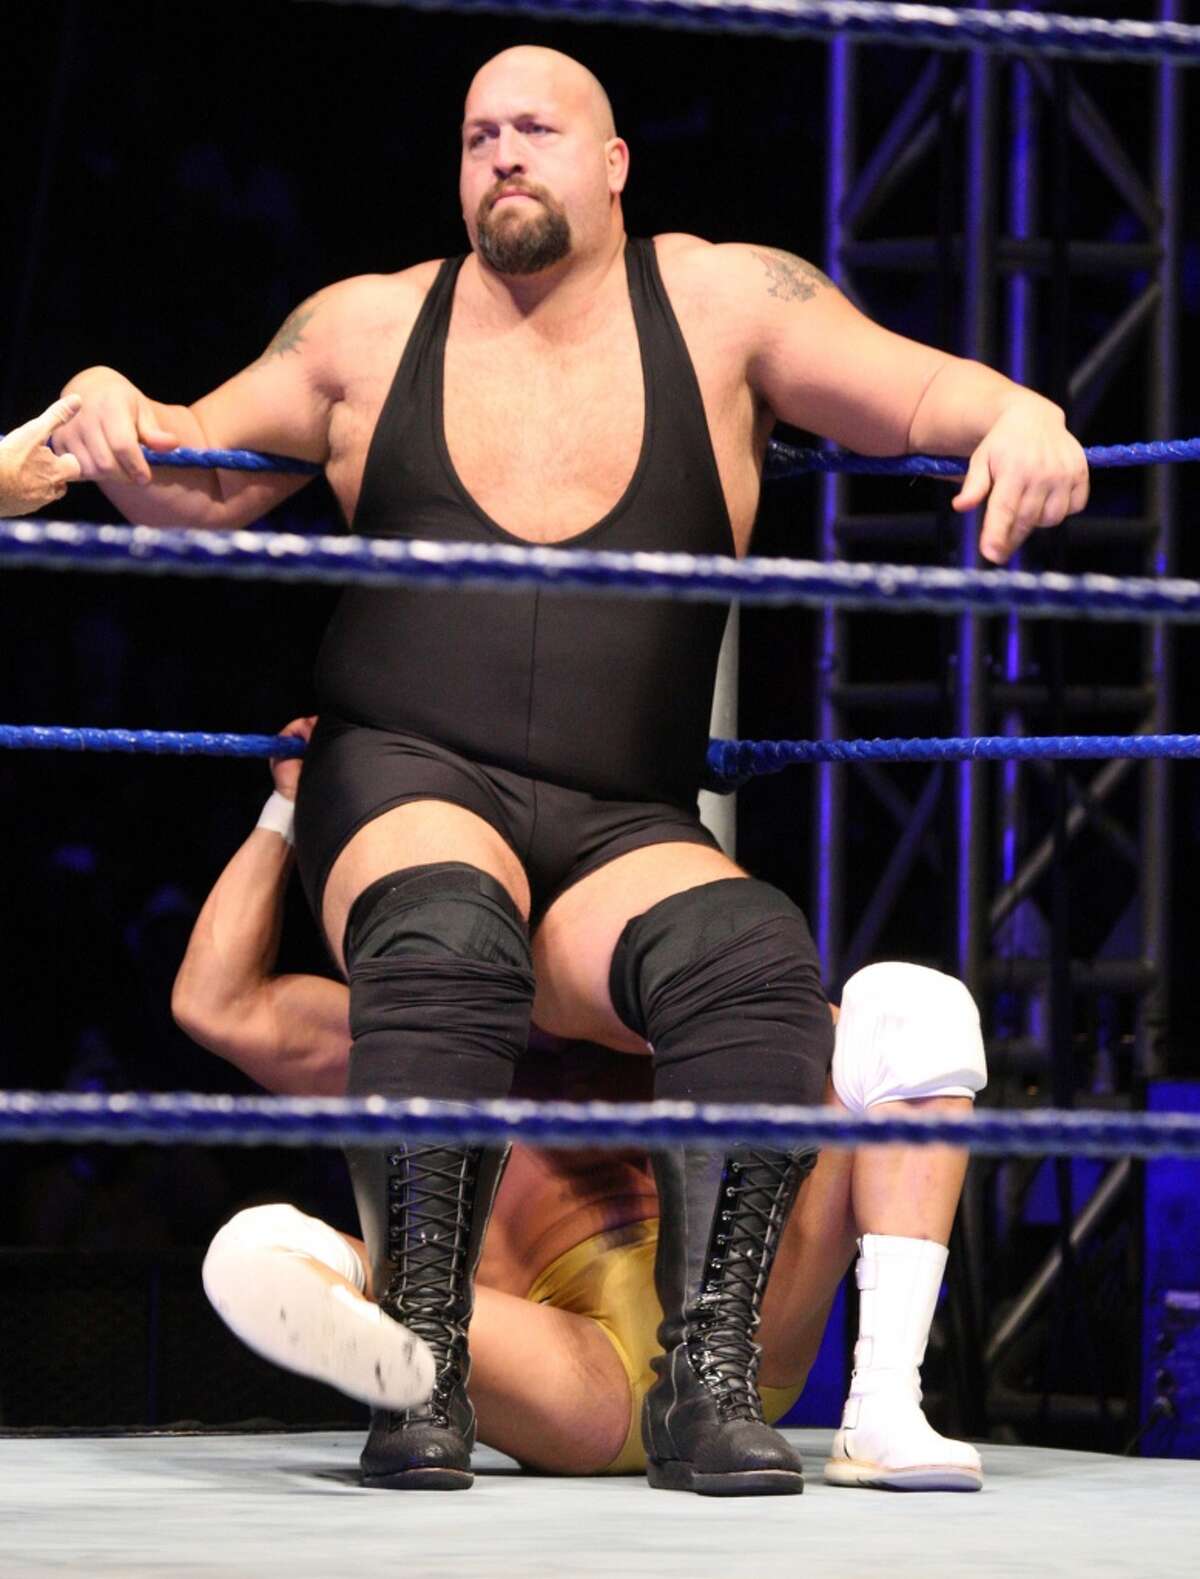 Big Show was charged with public exposure in 1998.